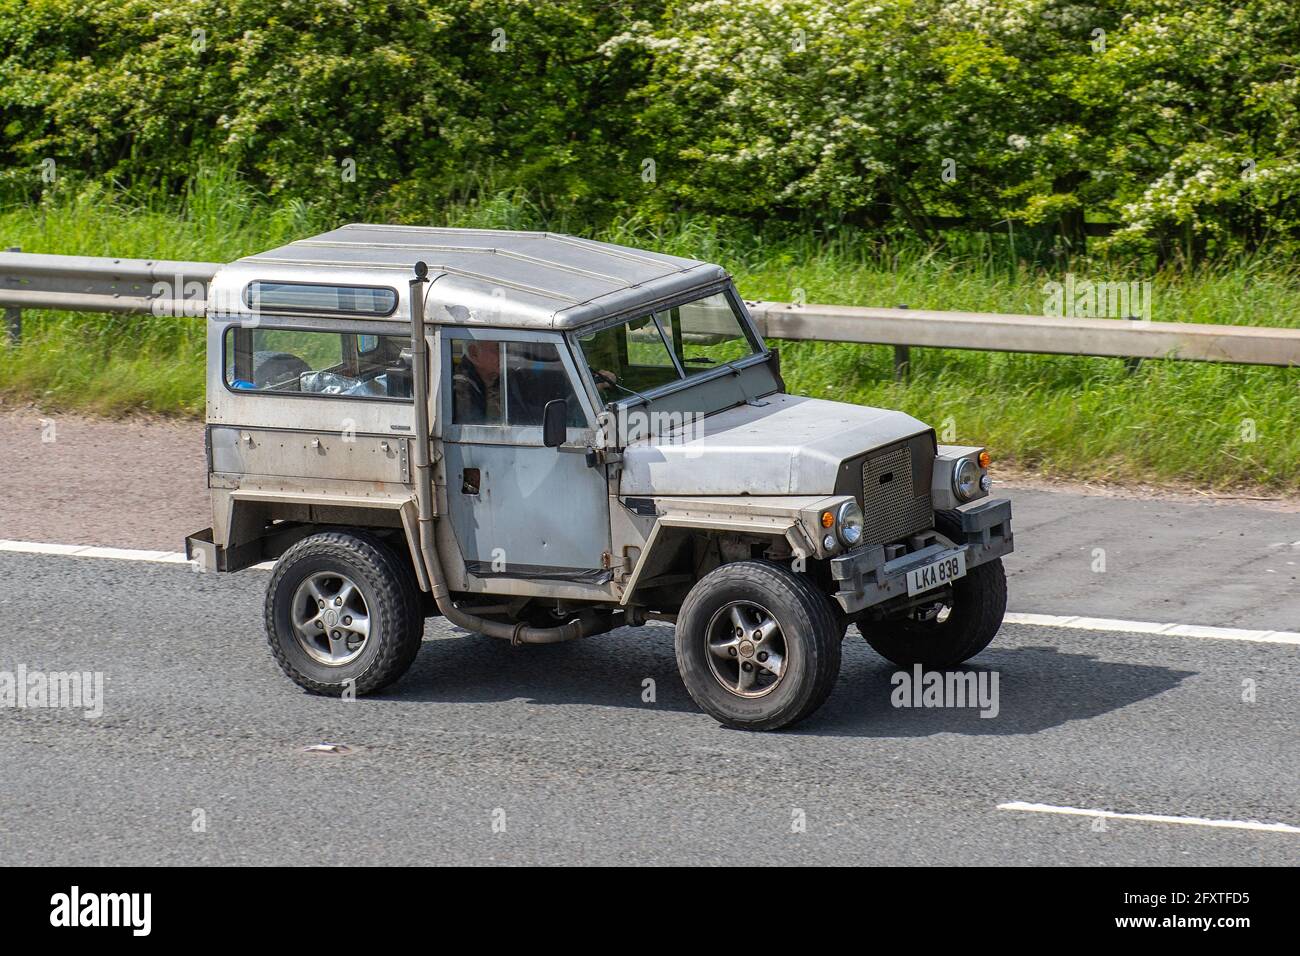 1981 silver Land Rover 2393cc diesel station wagon; Old type vintage  Land Rover SWB van, 80s classic autos. Decrepit dilapidated restoration project, barn find. Rusty, crusty, broken, tagged corroded vehicles, rusting wrecked junk SUV LCV on driving near Manchester, UK Stock Photo